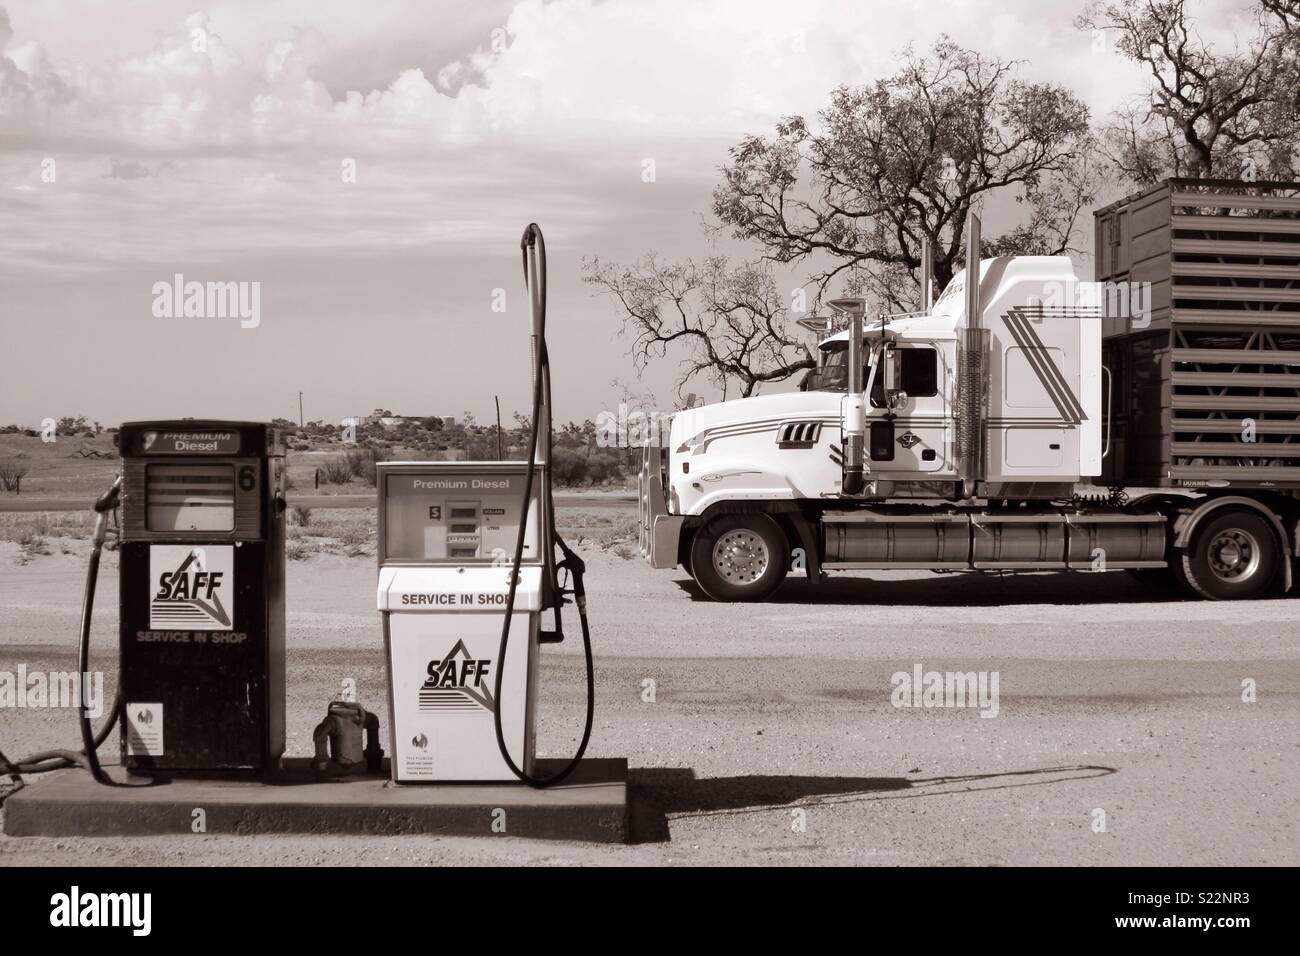 A big truck parked in front of a petrol station in the Australian outback Stock Photo